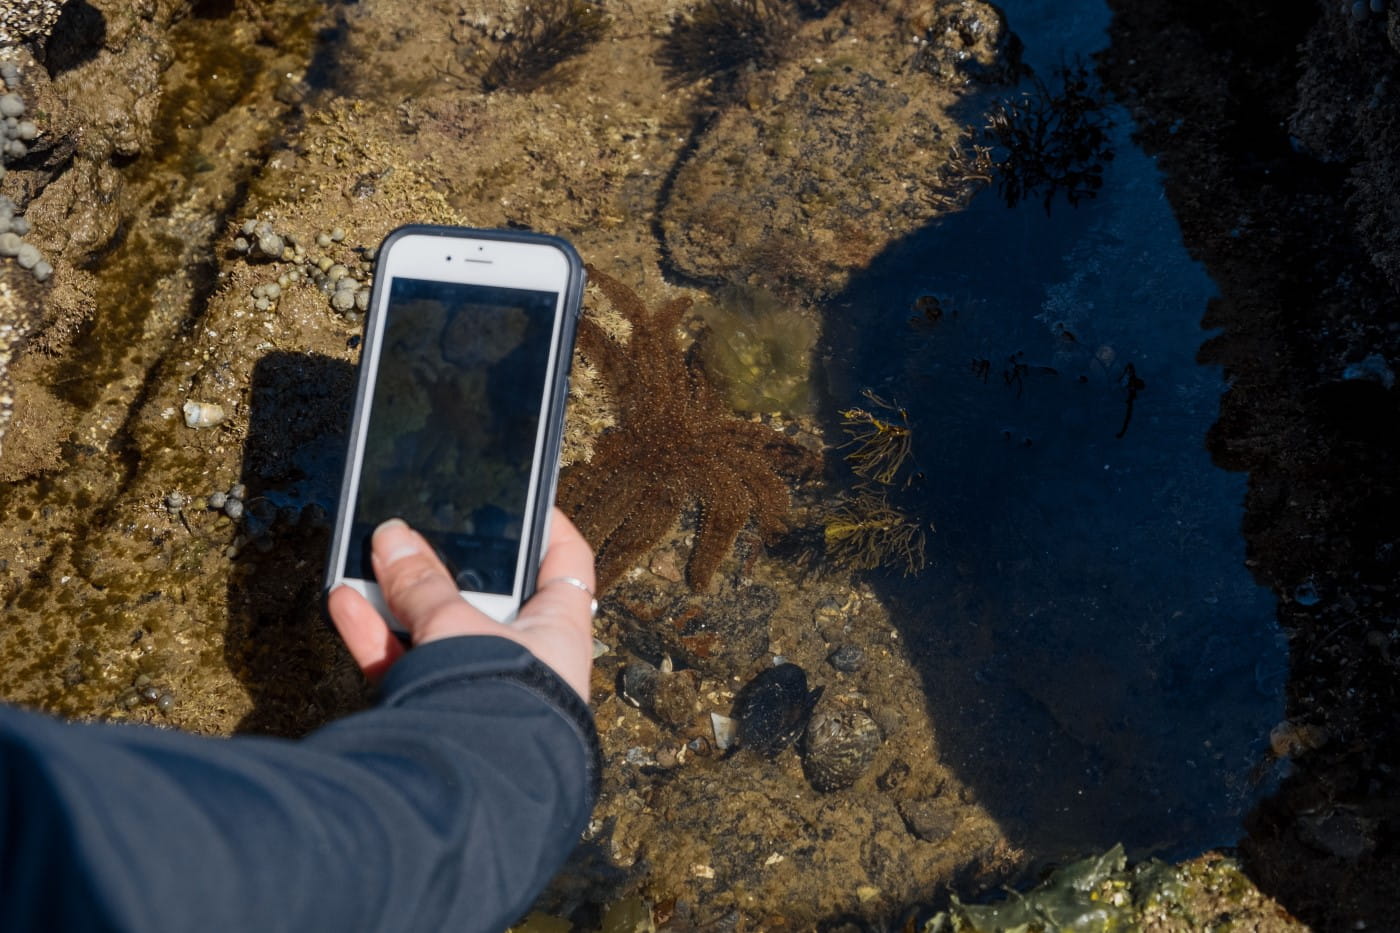 A close up image of someone with their arm outstretched taking a photo of a seastar laying on a rockpool on their mobile phone.